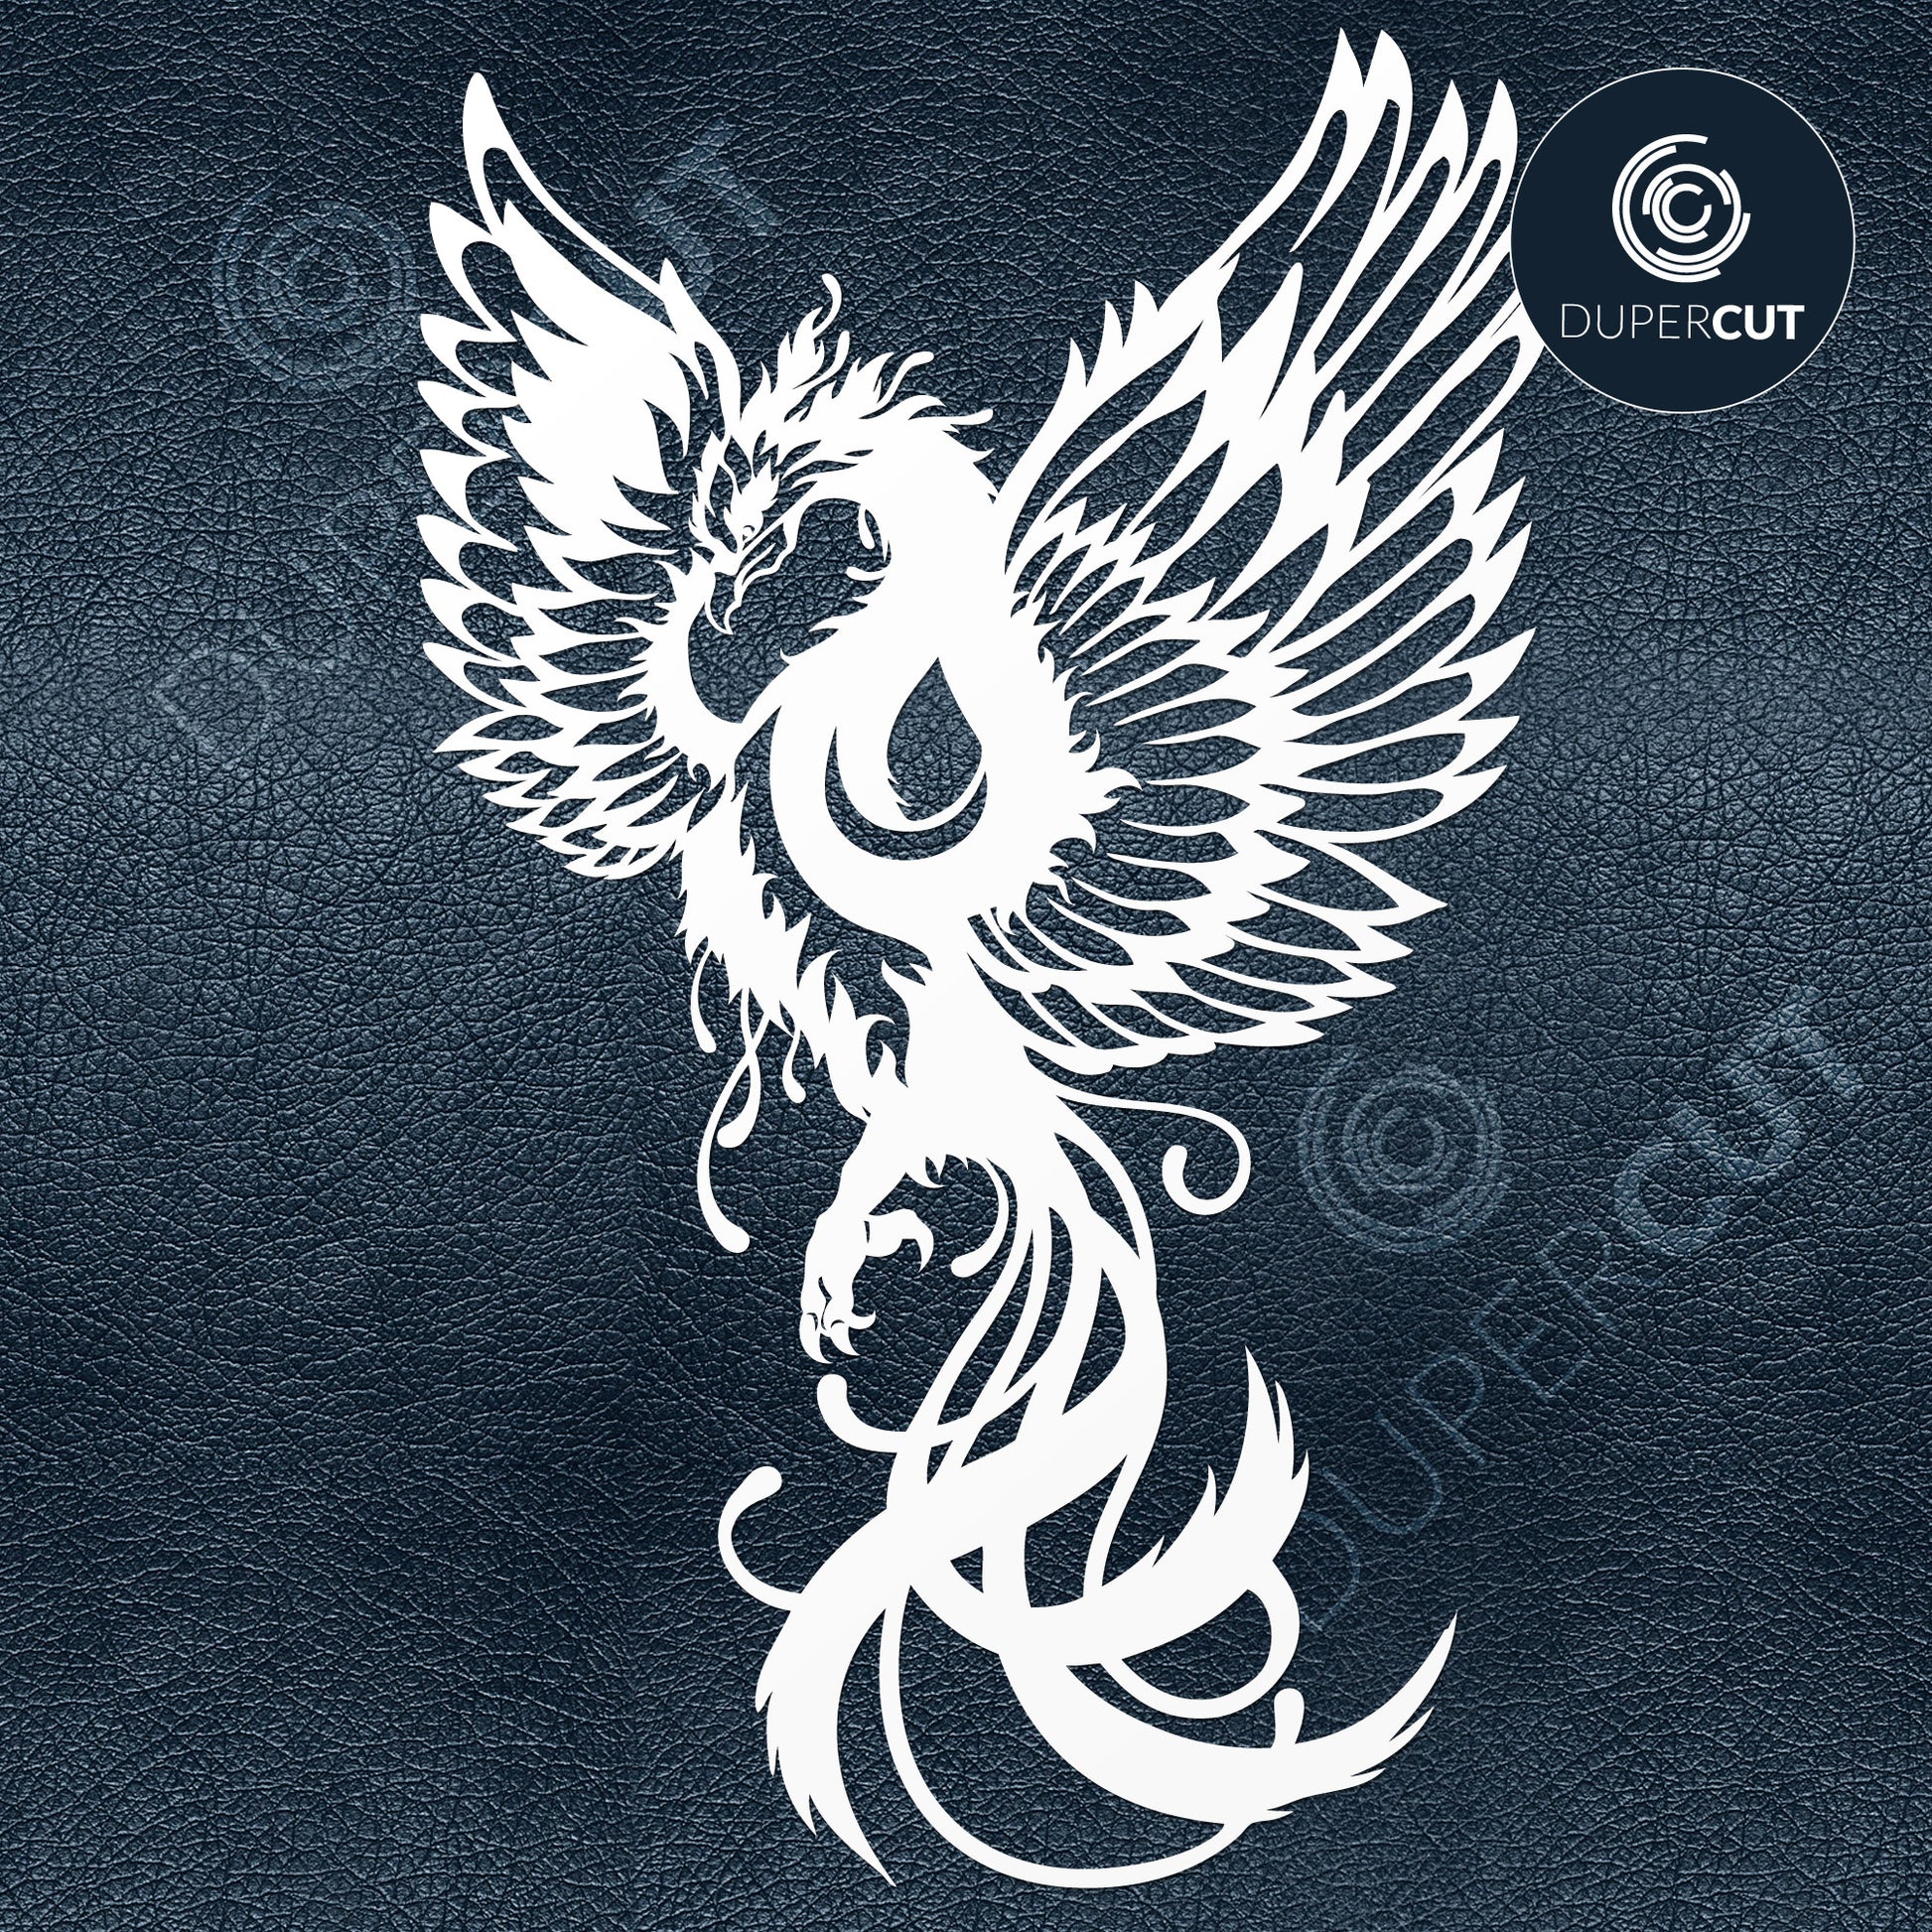 Phoenix paper cutting template, tattoo style - SVG DXF JPEG files for CNC machines, laser cutting, Cricut, Silhouette Cameo, Glowforge engraving